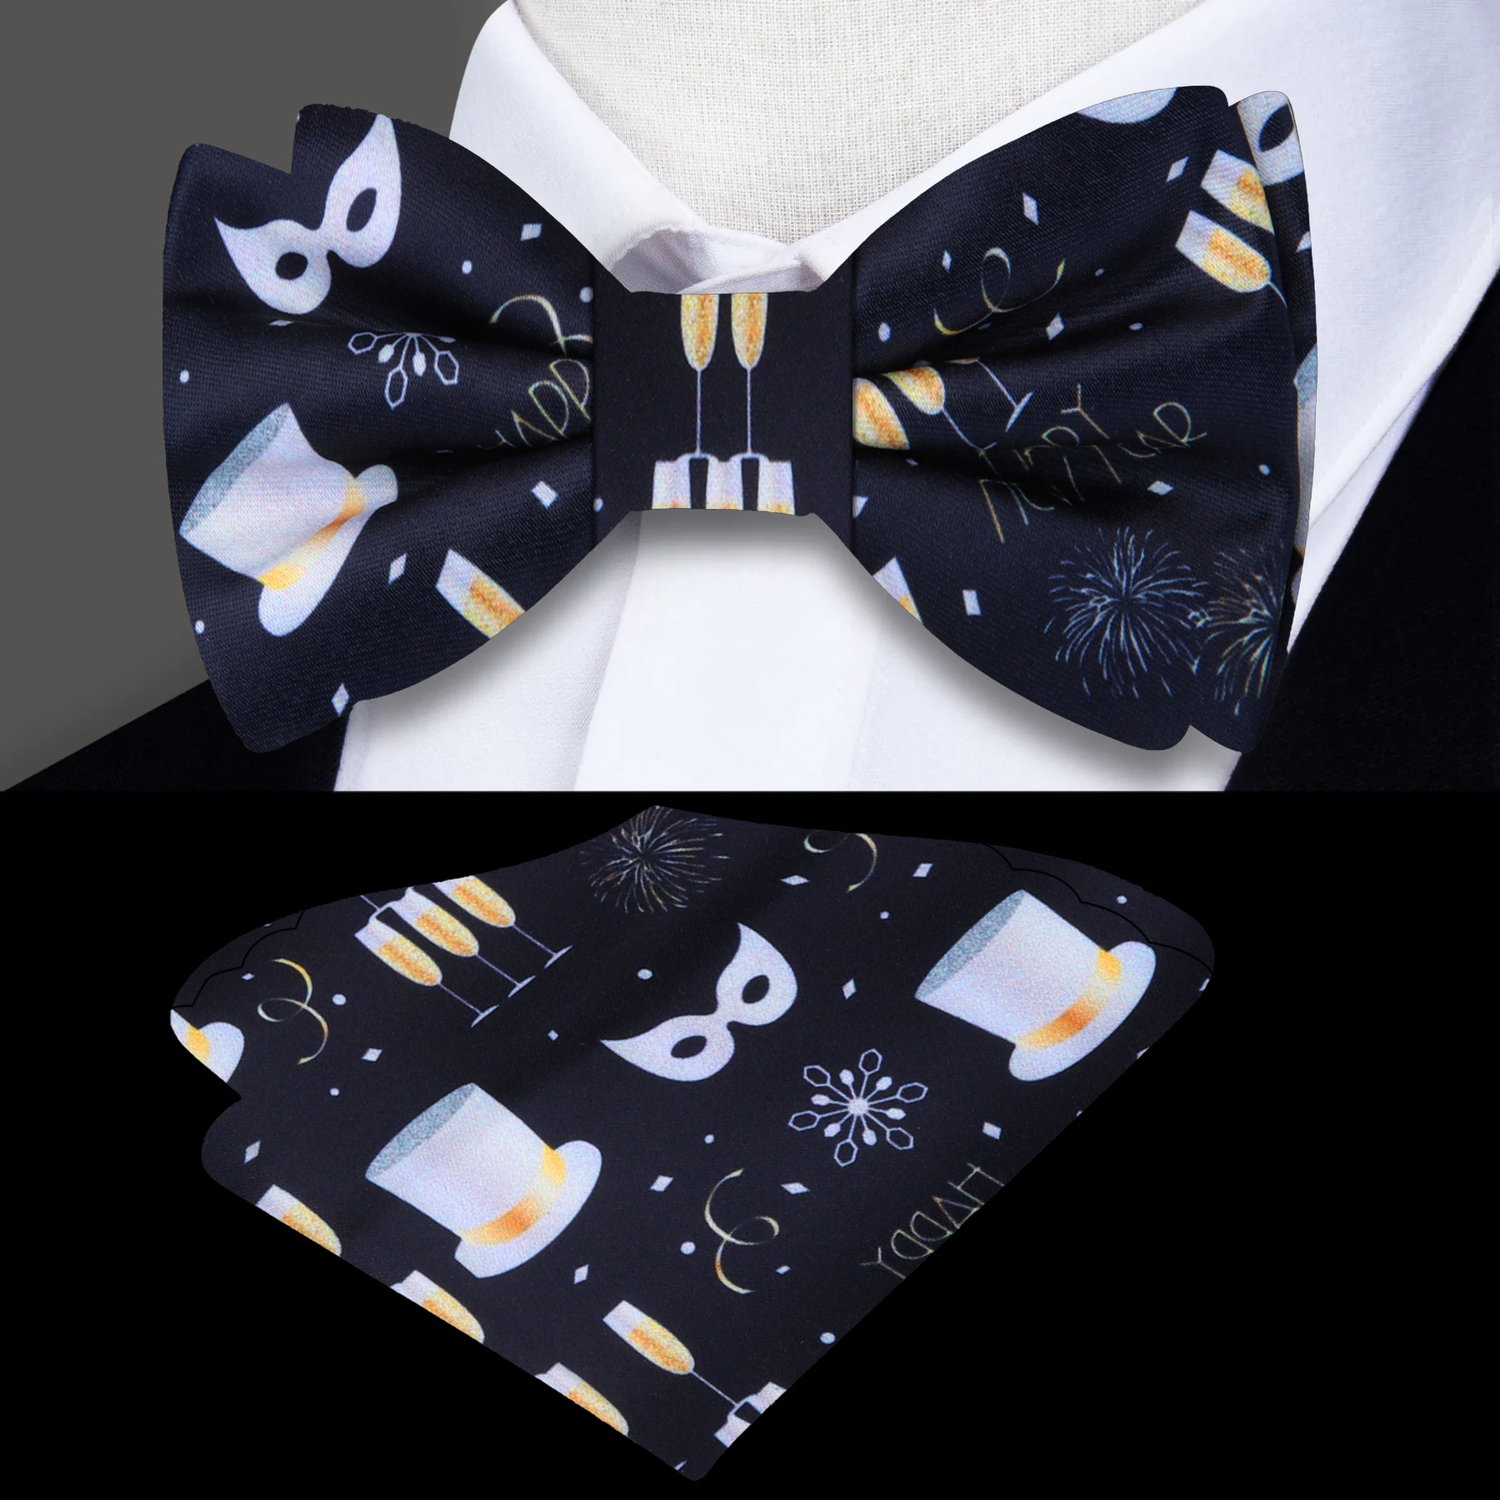 Black, White and Gold Champagne, Mask, Hat, Fireworks Happy New Year Bow Tie and Square